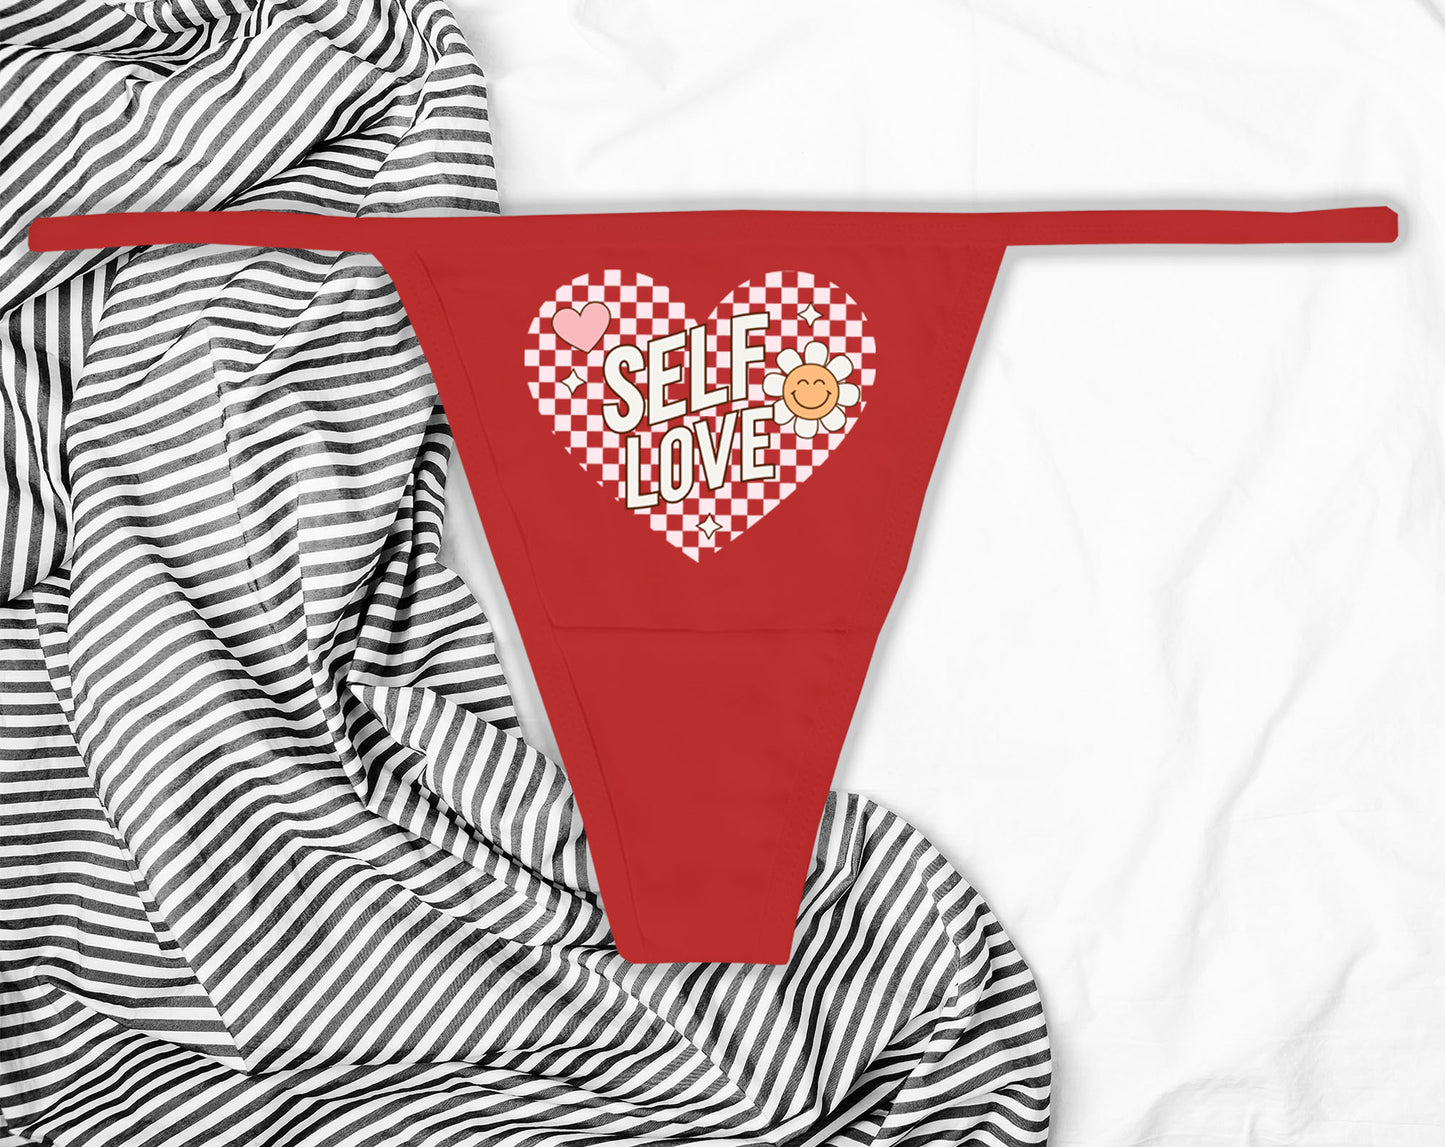 Self Love Panties, Retro Self Love, Cute Flower, Retro 70s, Vintage 80s, VSCO, 90s Check, Good Vibes, Pink Check, Hearts and Flowers, Panty Party, Divorce Party, Galentines Day, Single